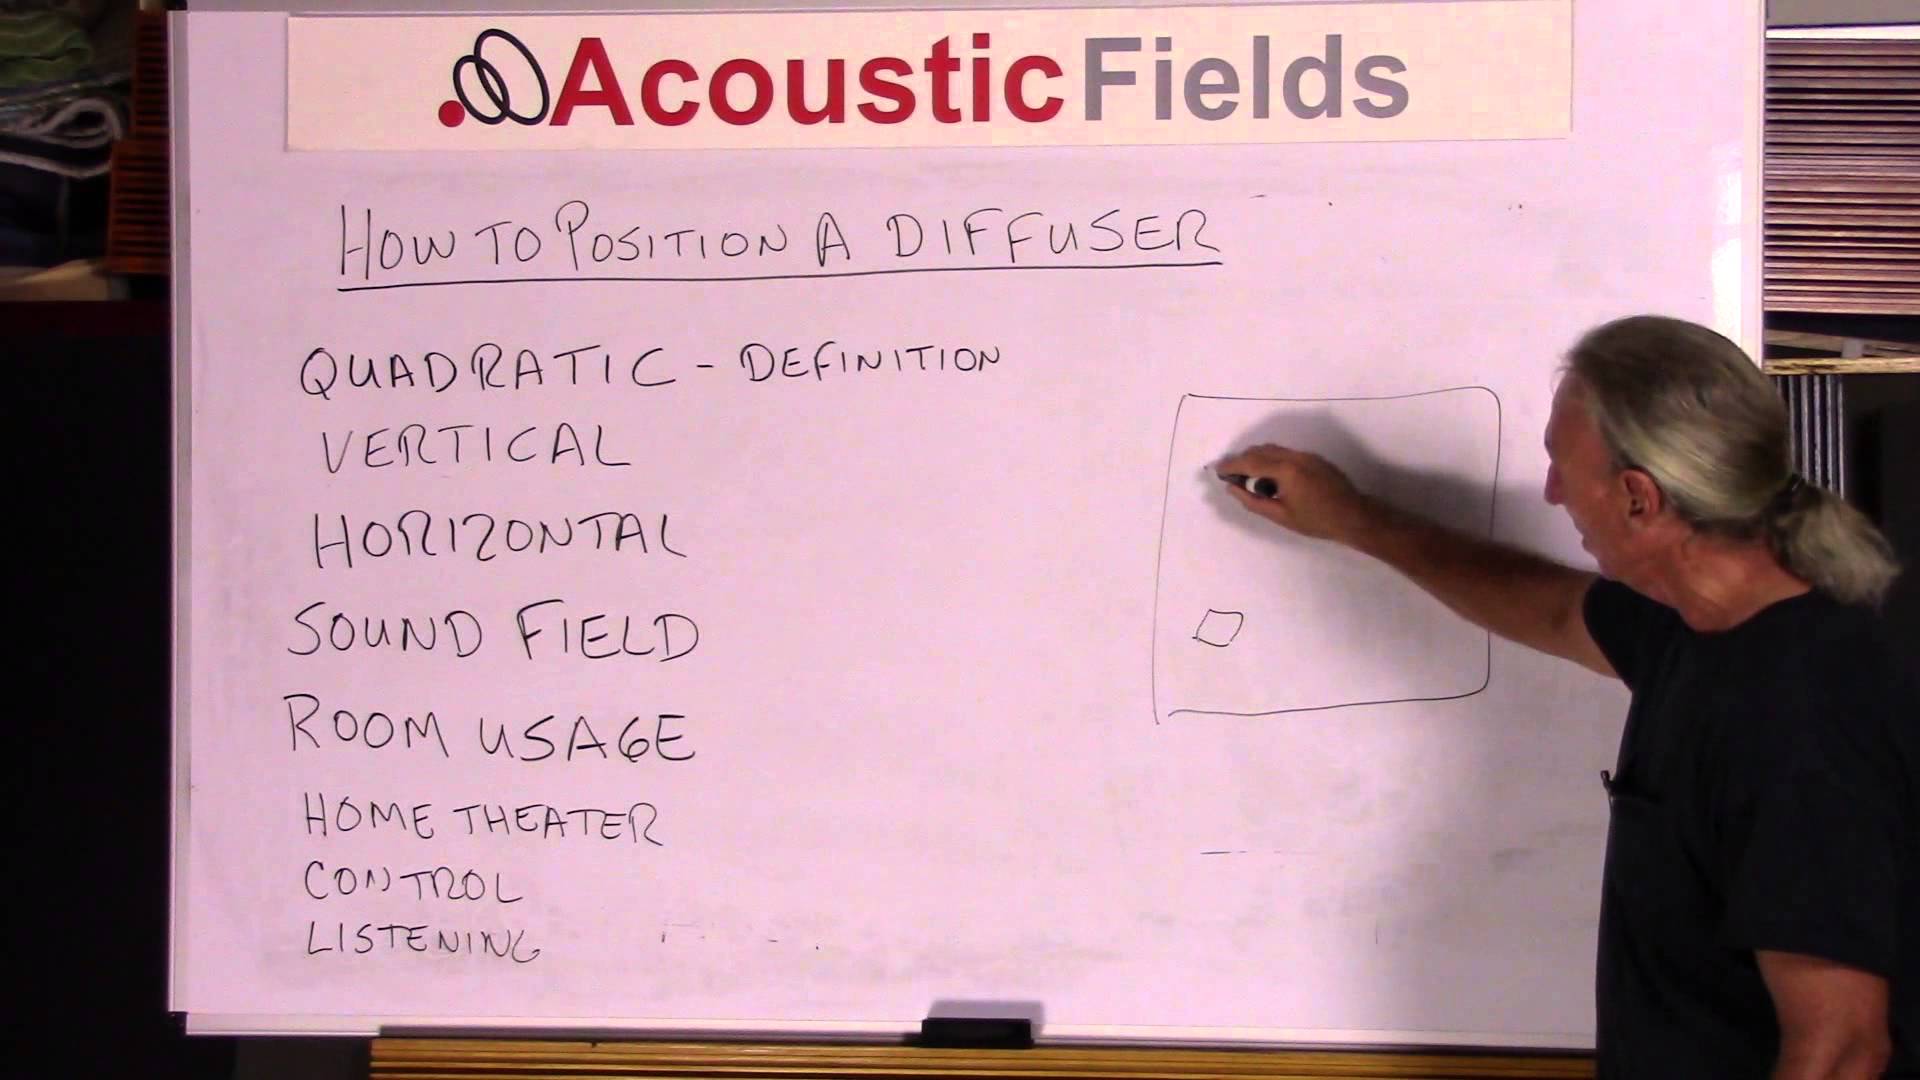 Ideal Acoustic Diffuser Placement Guidelines